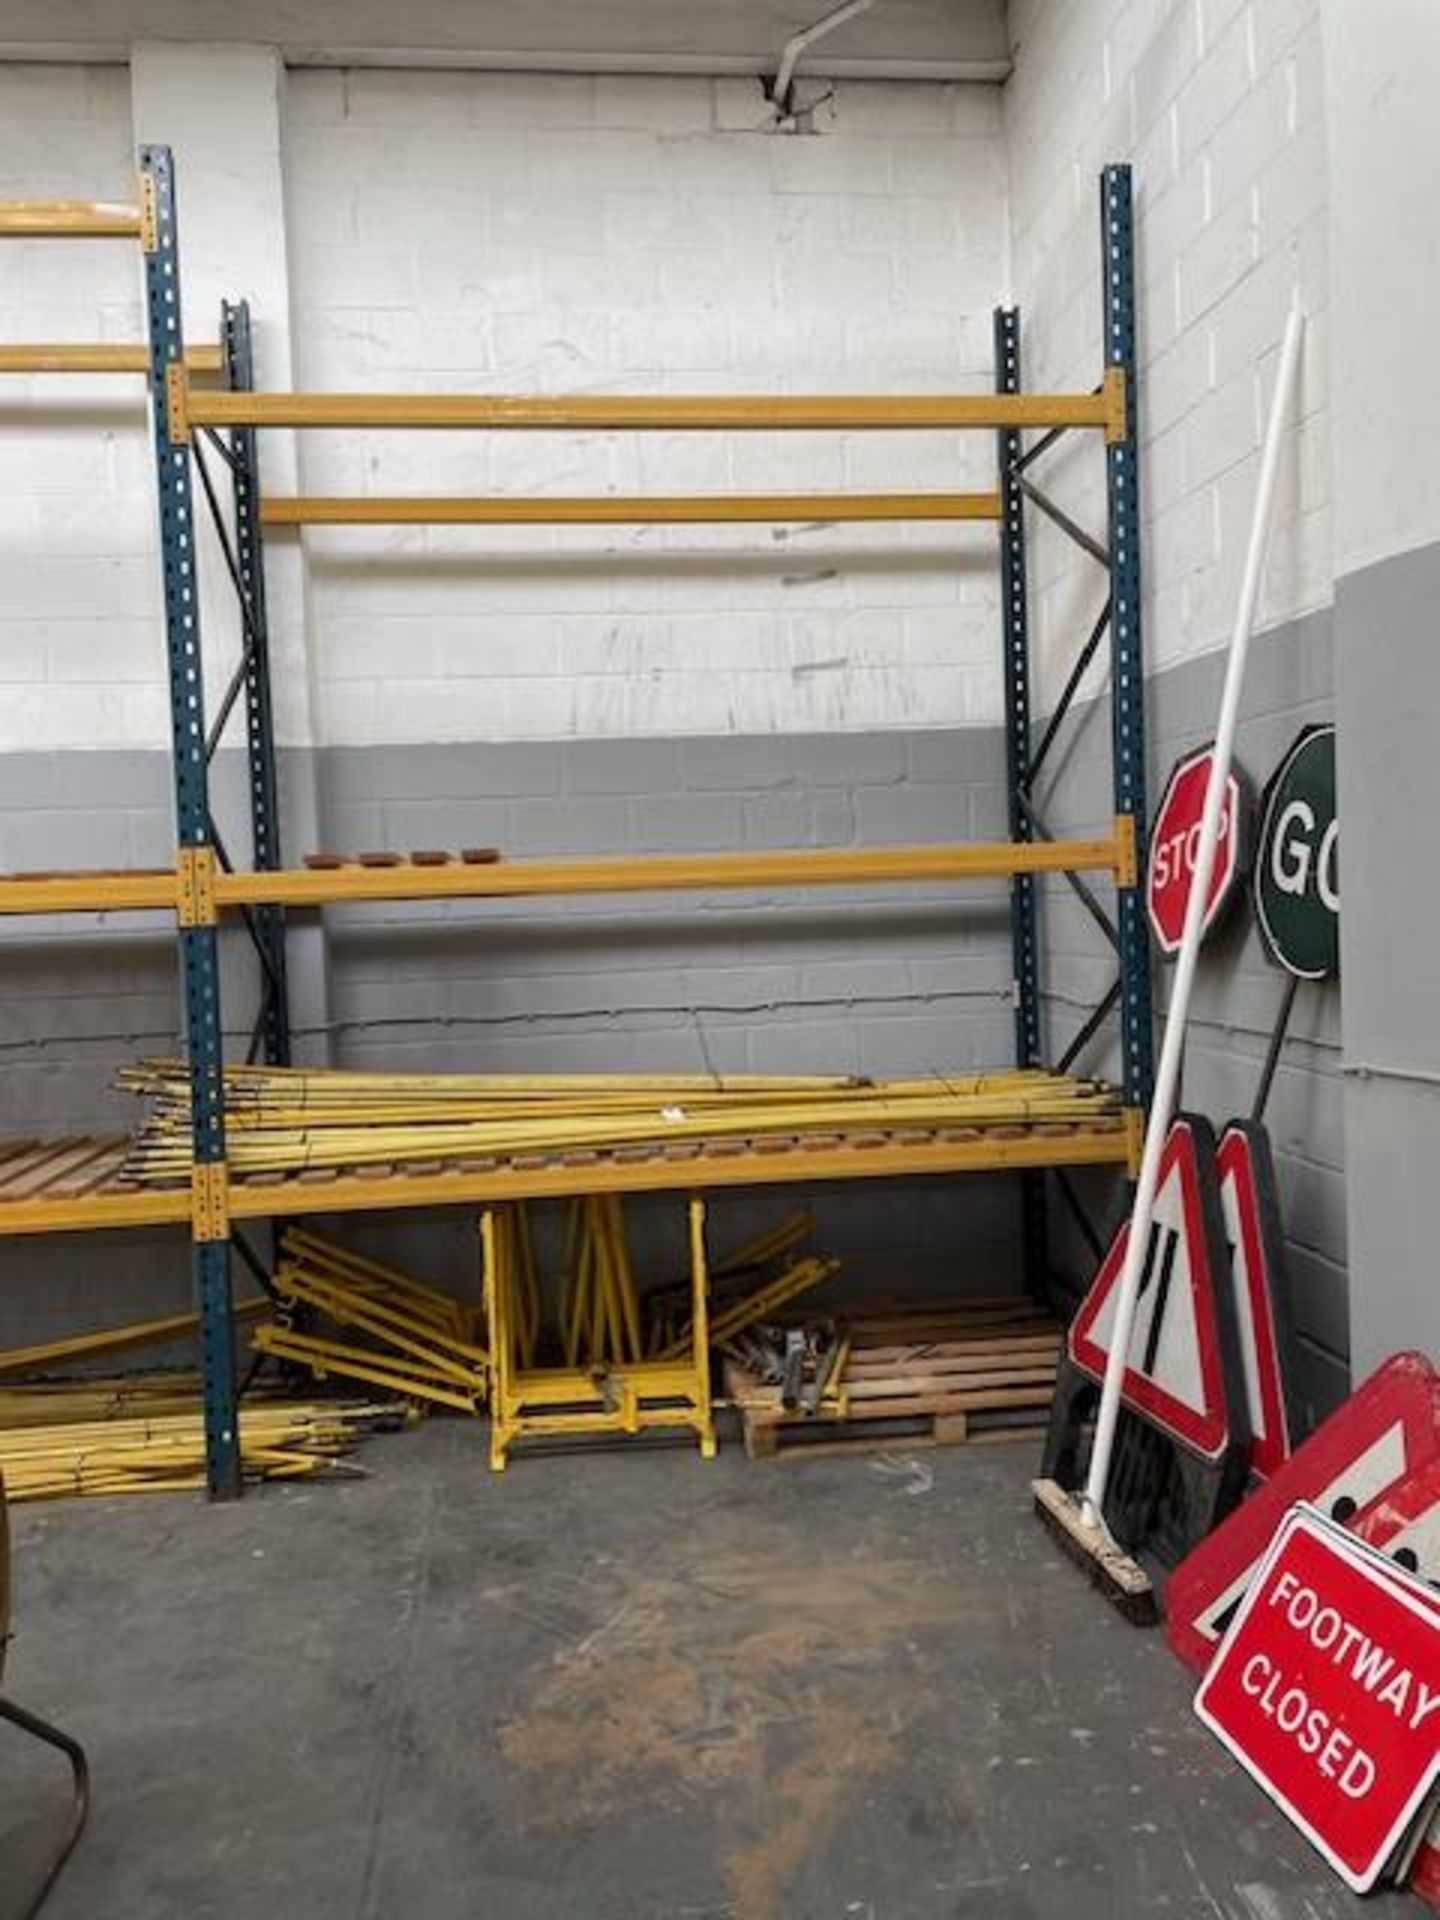 5 Bays, 3-Tier Boltless Steel Pallet Racking (Purchaser To Dismantle) (Location: Harlow. Please - Image 3 of 4